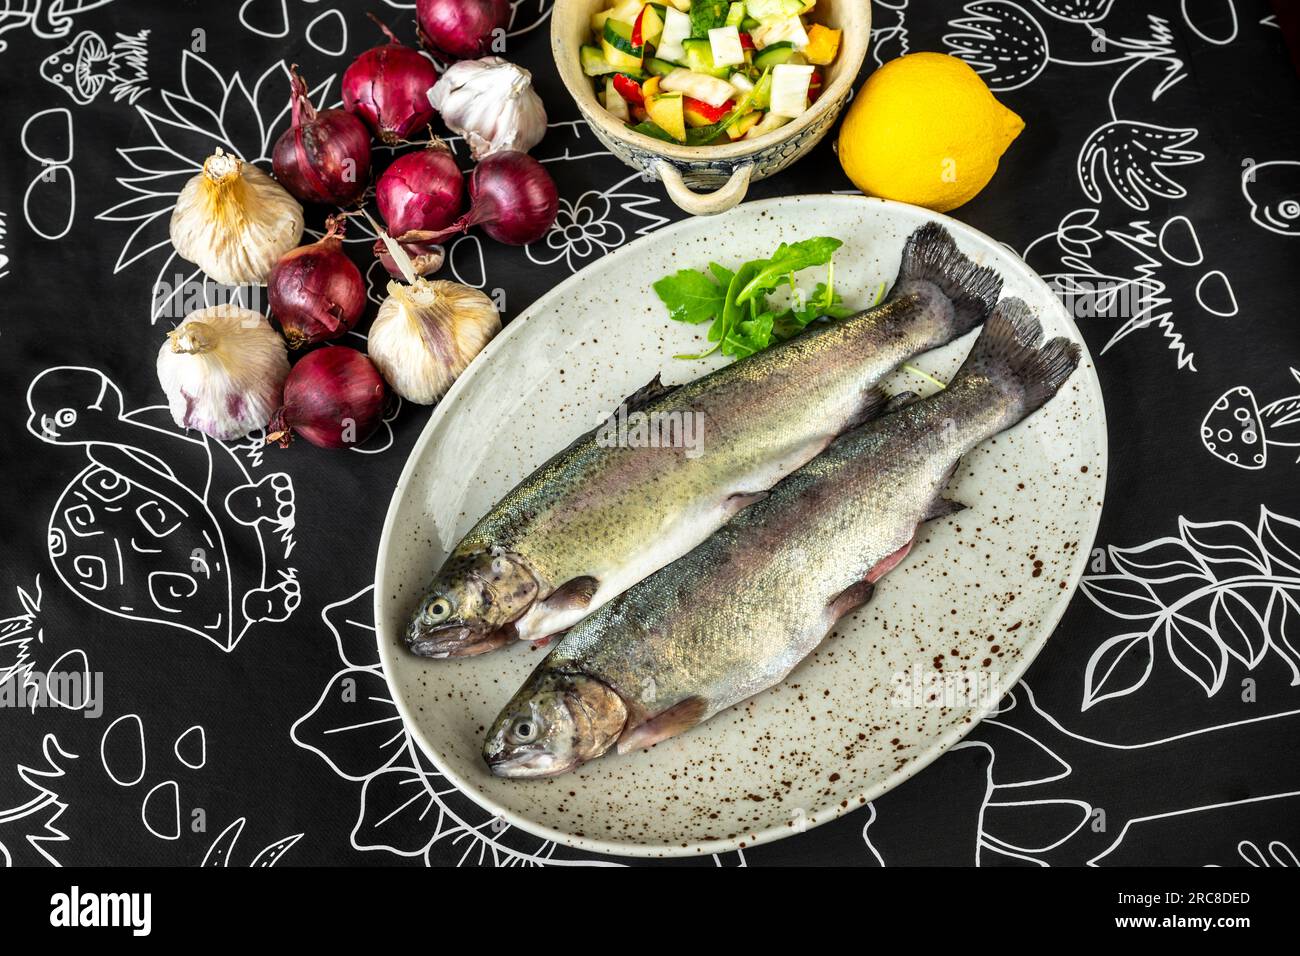 Two rainbow trout on plate, many onion, garlic and lemon on black table, meal preparation. Stock Photo